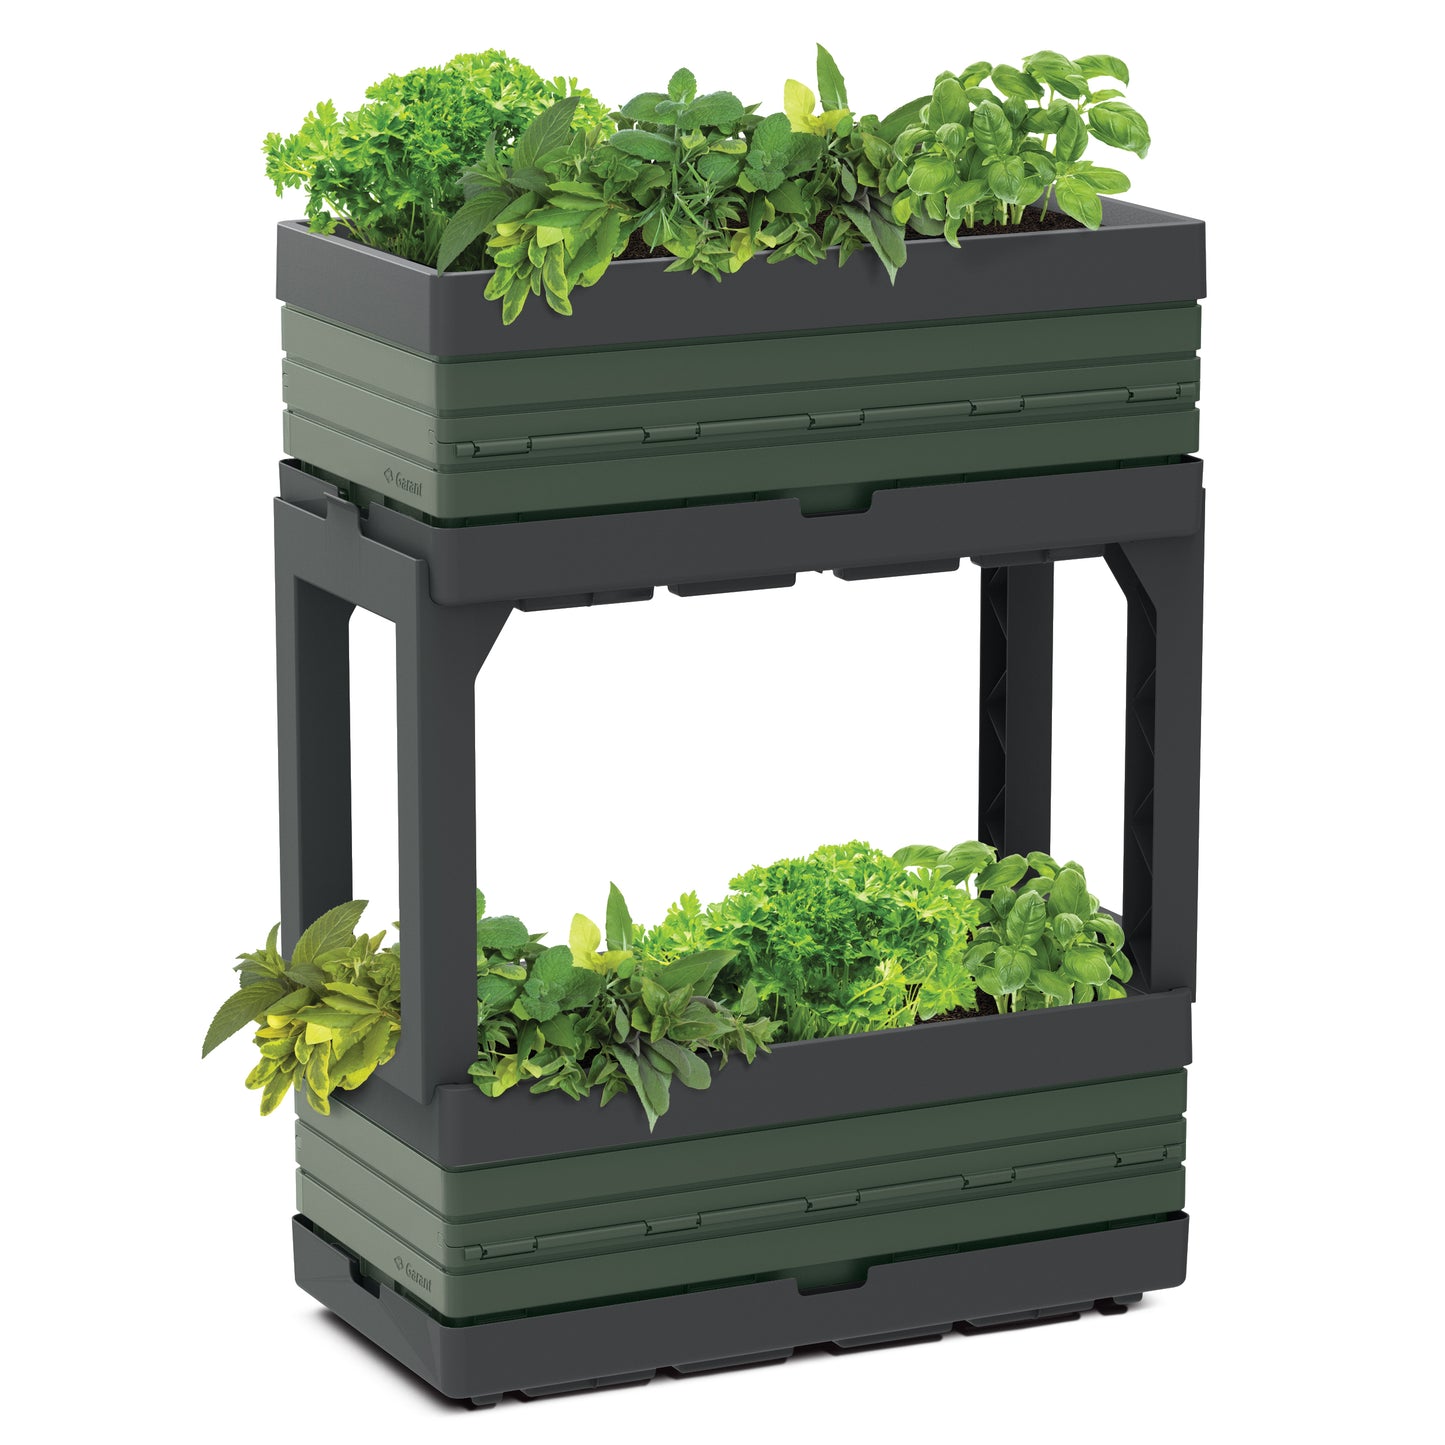 Modular Herb Garden Kit, includes 2 planters and 2 legs, Green